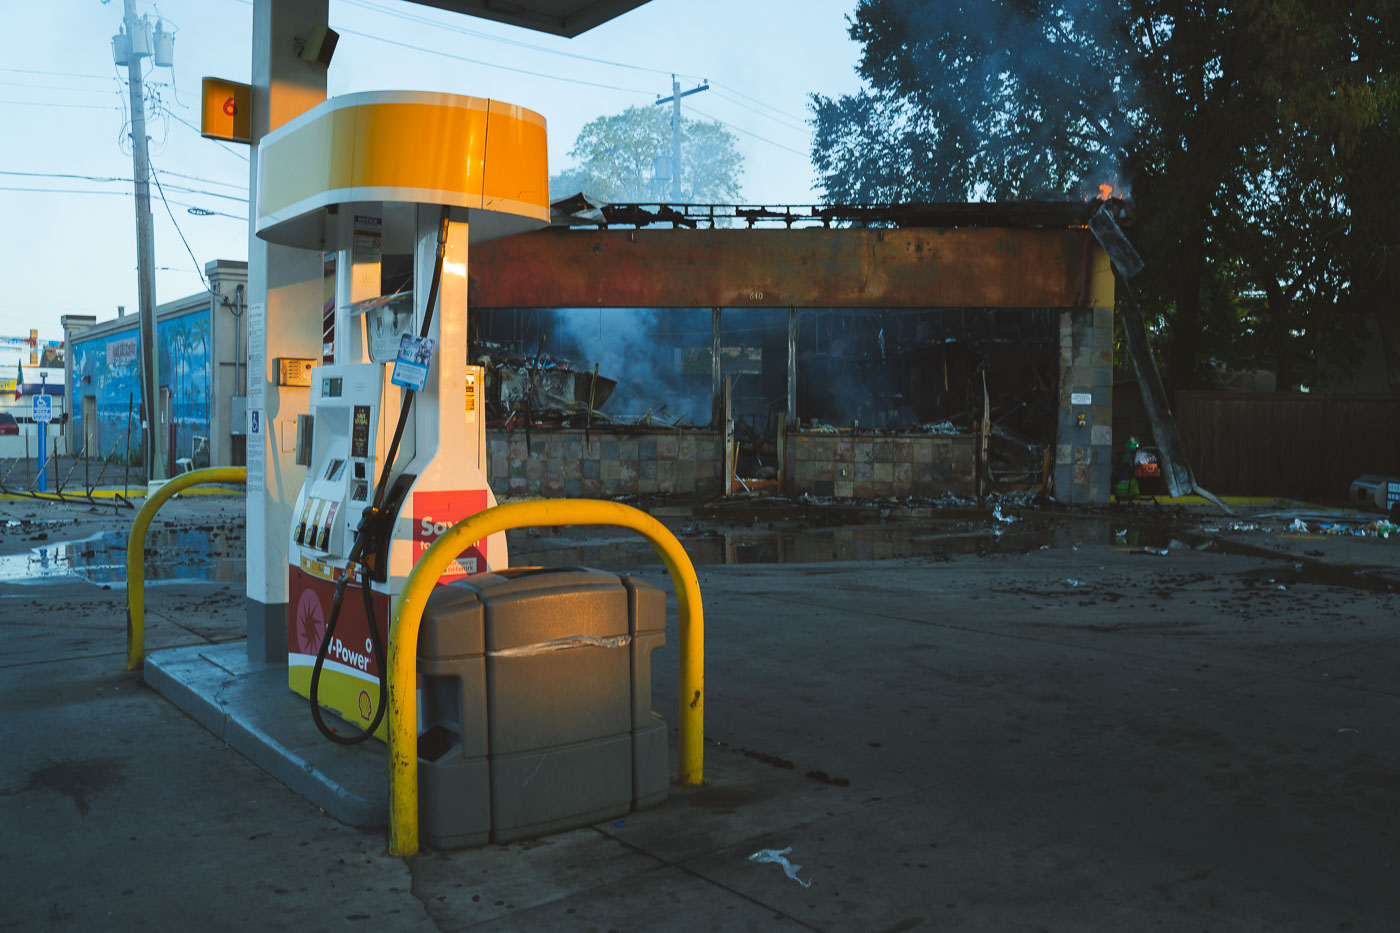 Shell gas station on fire on Lake Street as sun rises